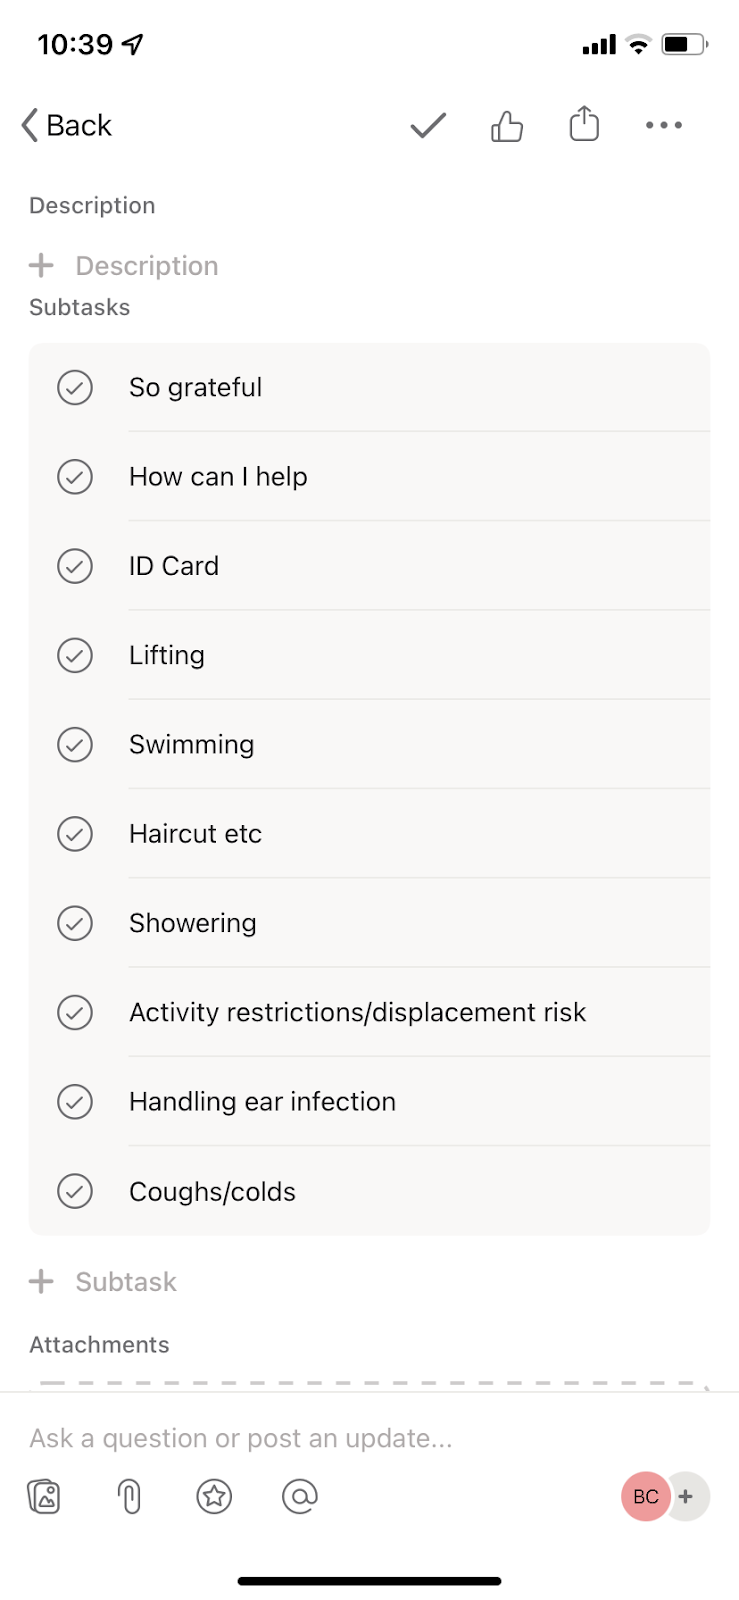 Project management software screenshot with a list of topics including: gratitude, CI ID card, lifting, swimming, haircut, showering, displacement risk, ear infections
